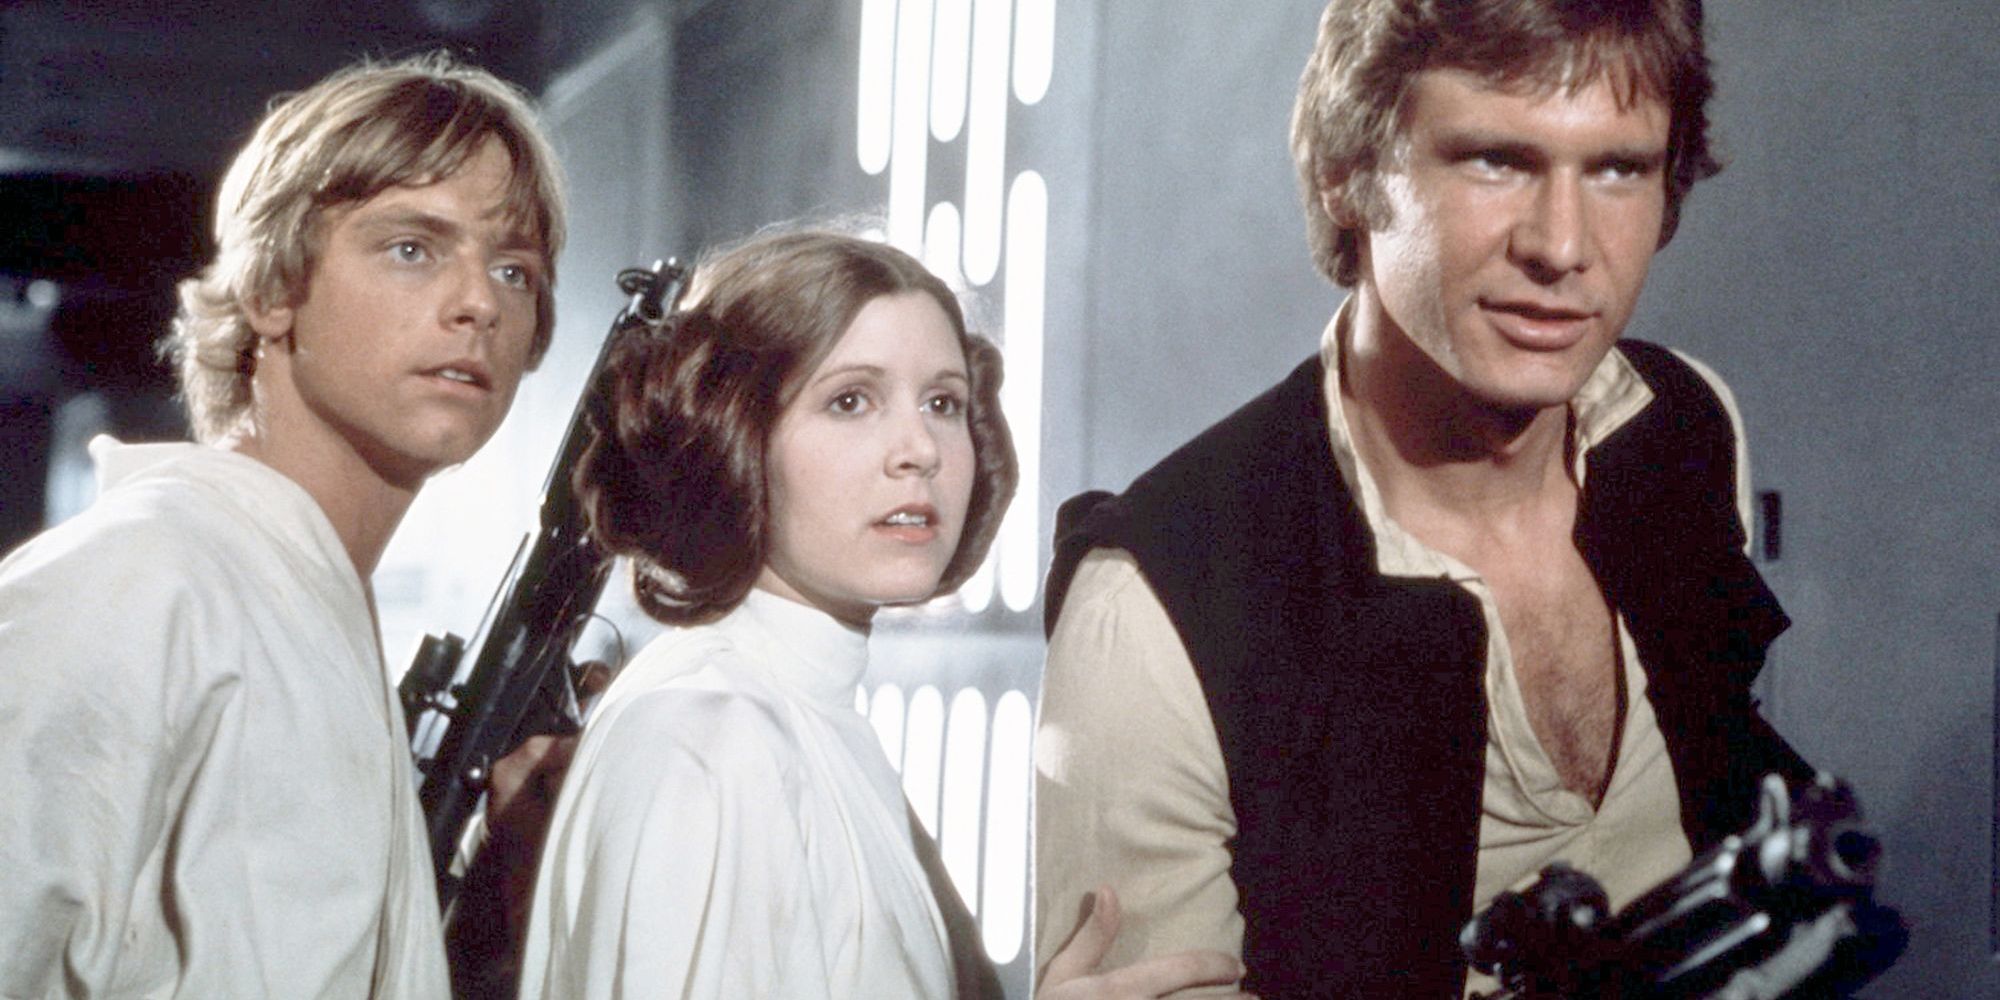 Luke, Leia and Han looking in the same direction in Star Wars: A New Hope.